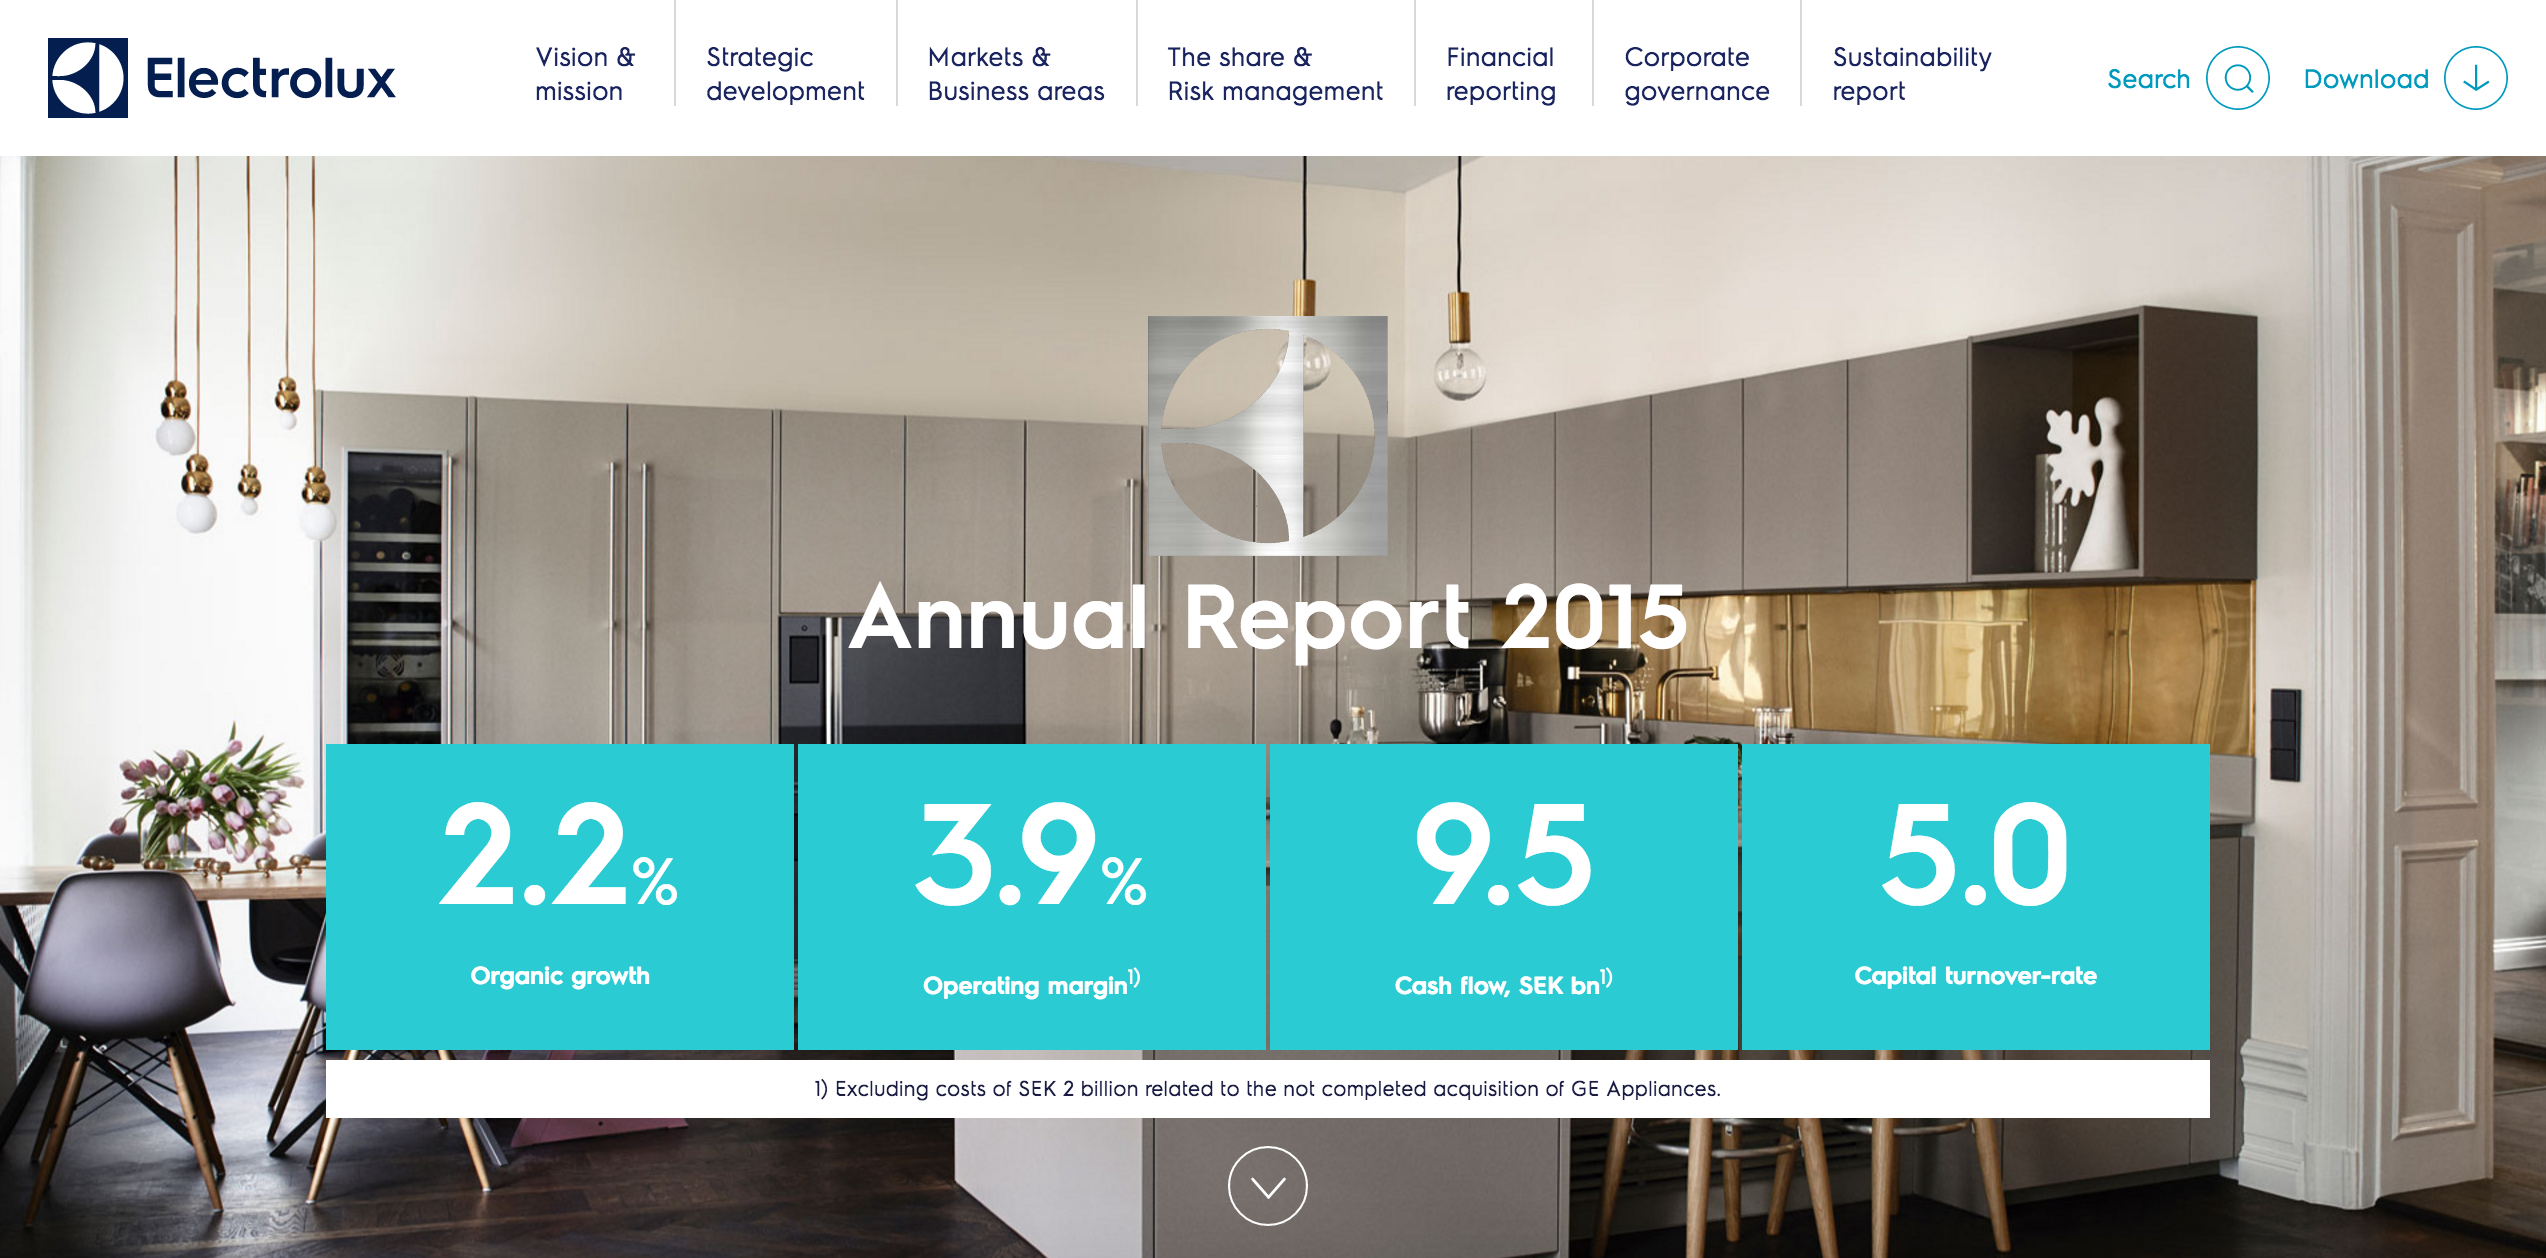 images/blog/2016/electrolux-annual-report-1.png